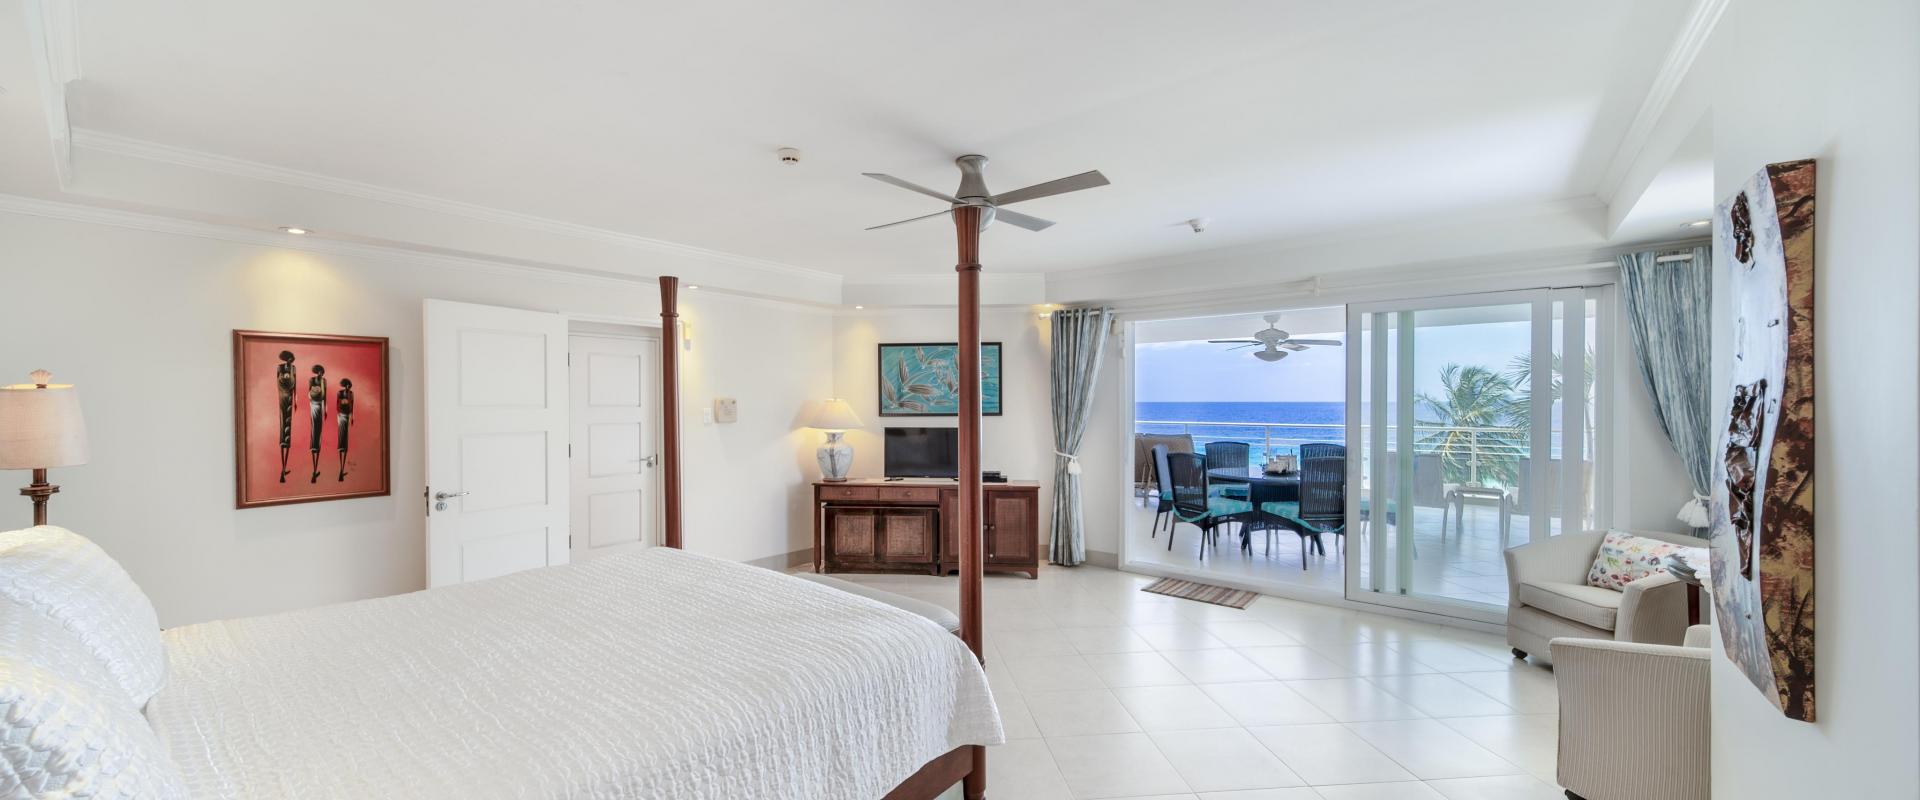 Palm Beach 502 Holiday Rental Barbados Master Bedroom With Oceanview